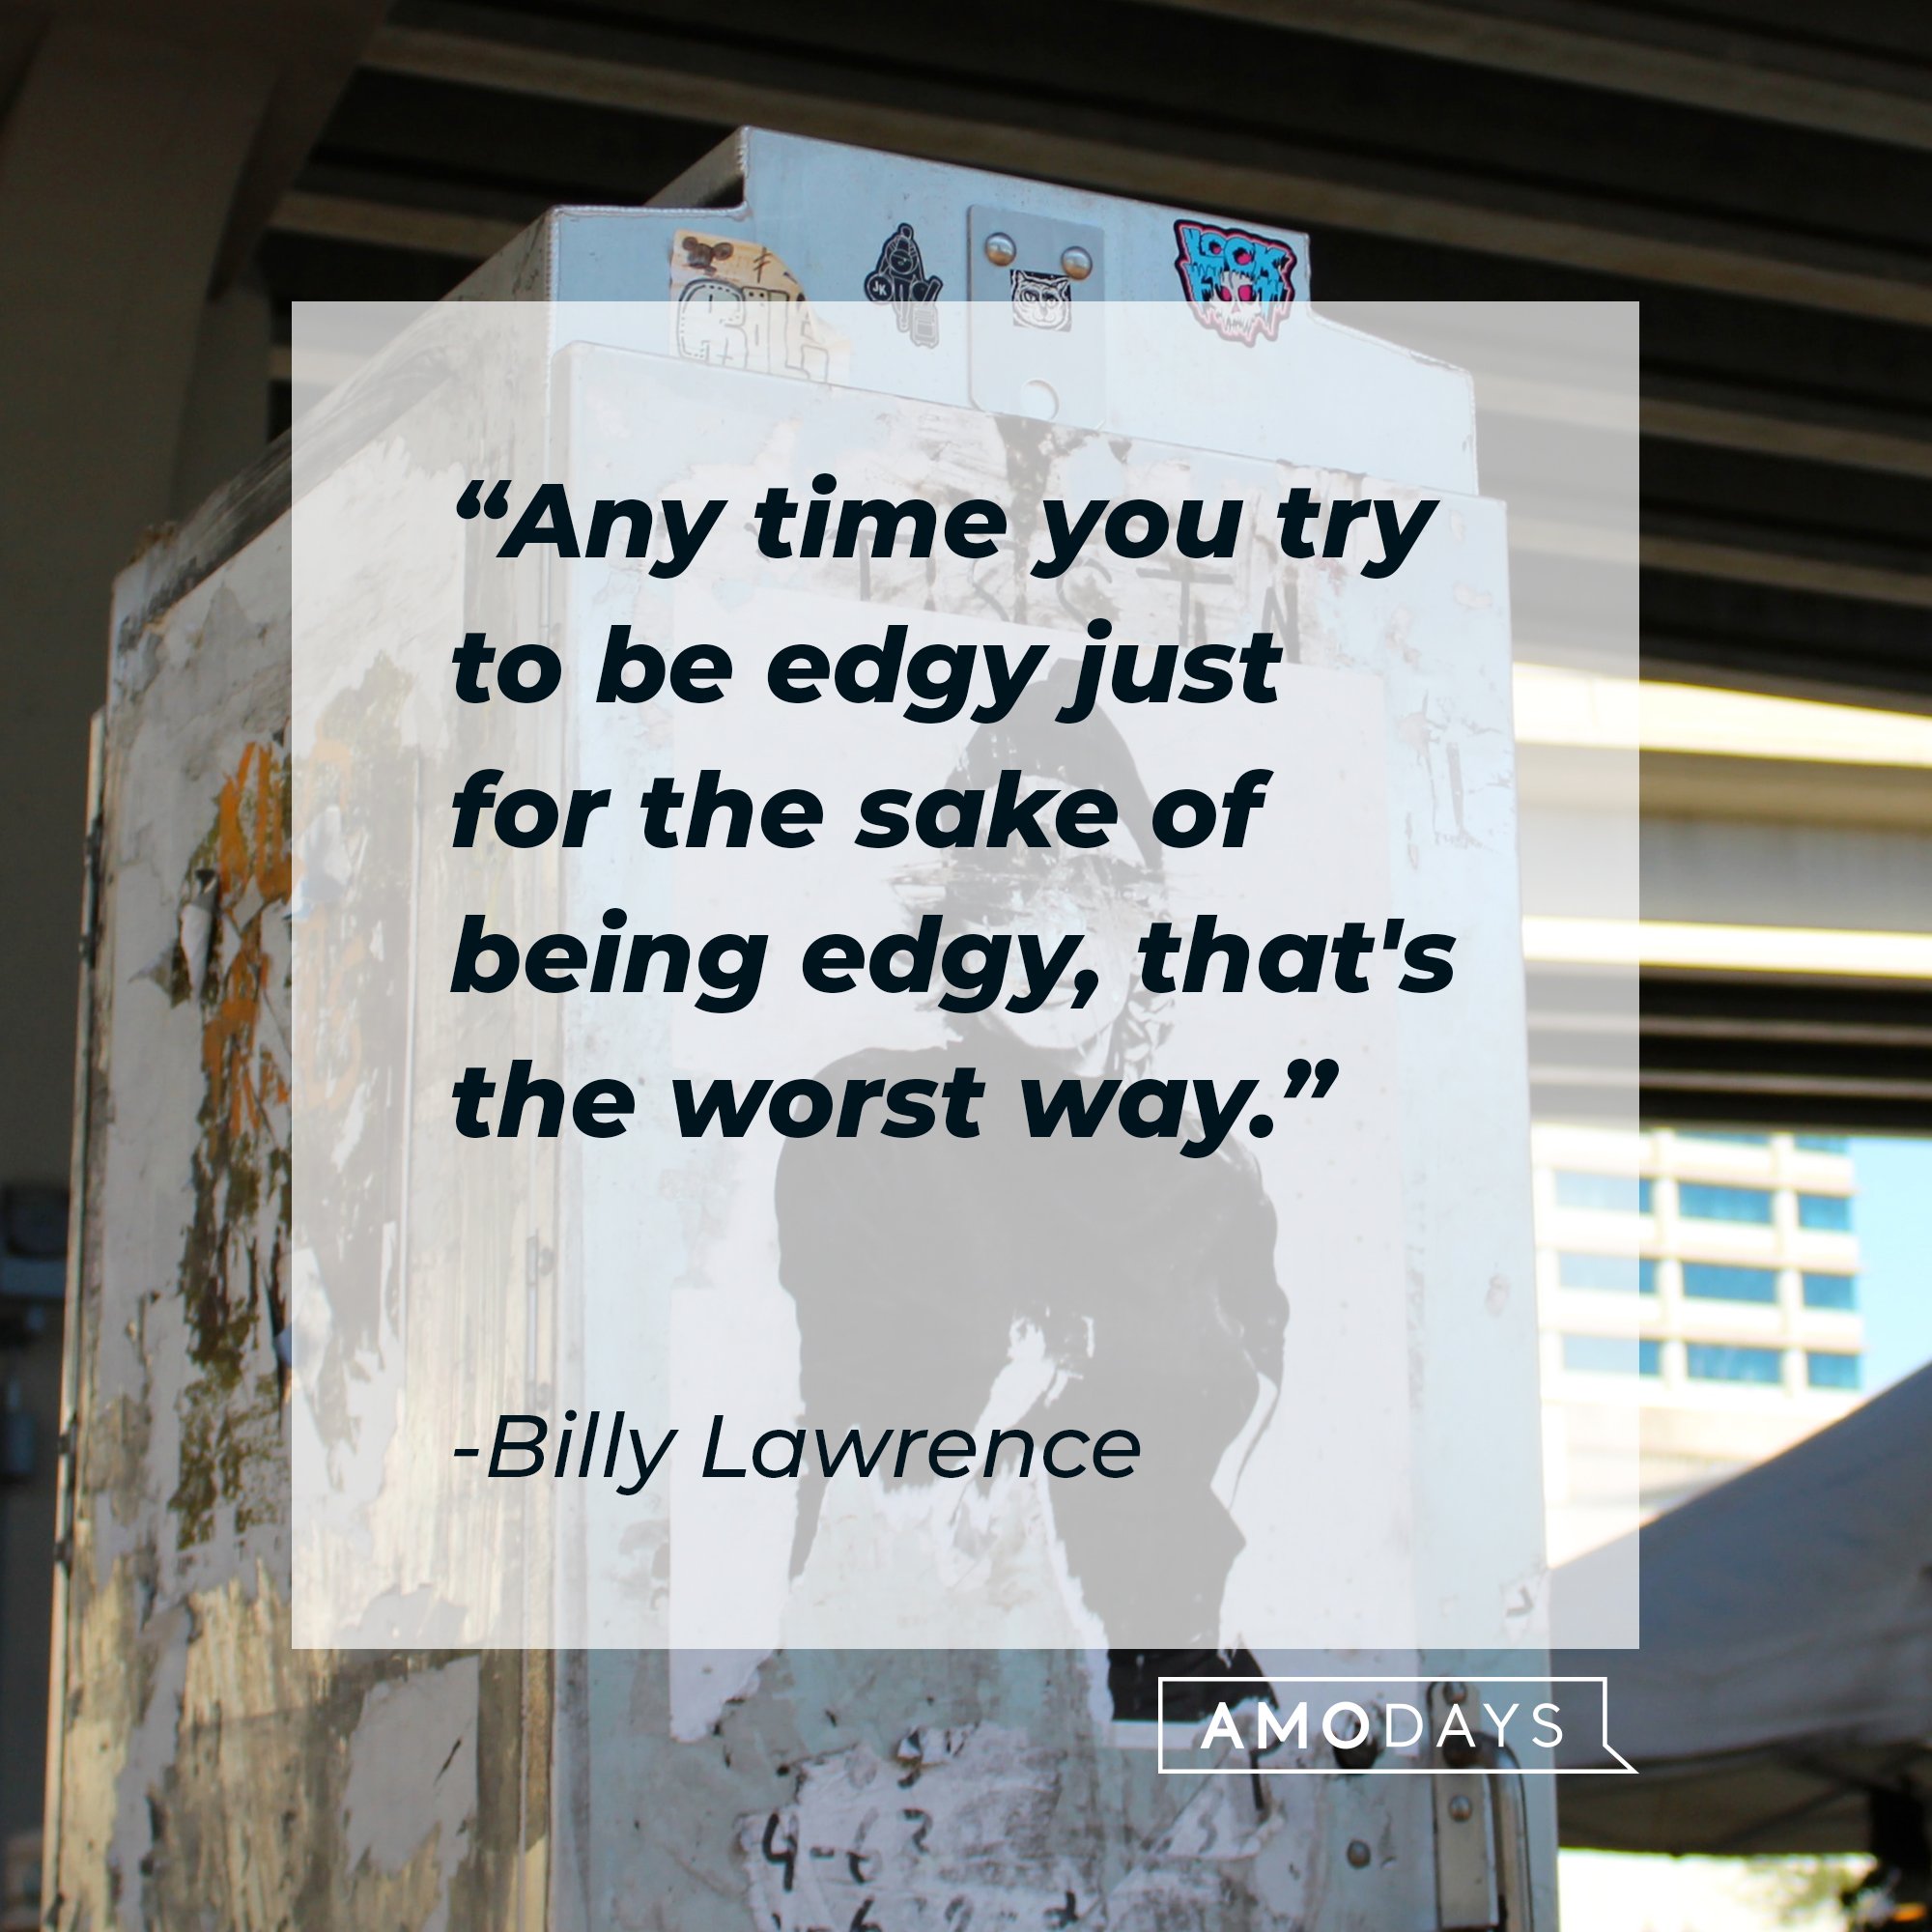 Billy Lawrence’s quote: "Any time you try to be edgy just for the sake of being edgy, that's the worst way.” | Image: AmoDays 